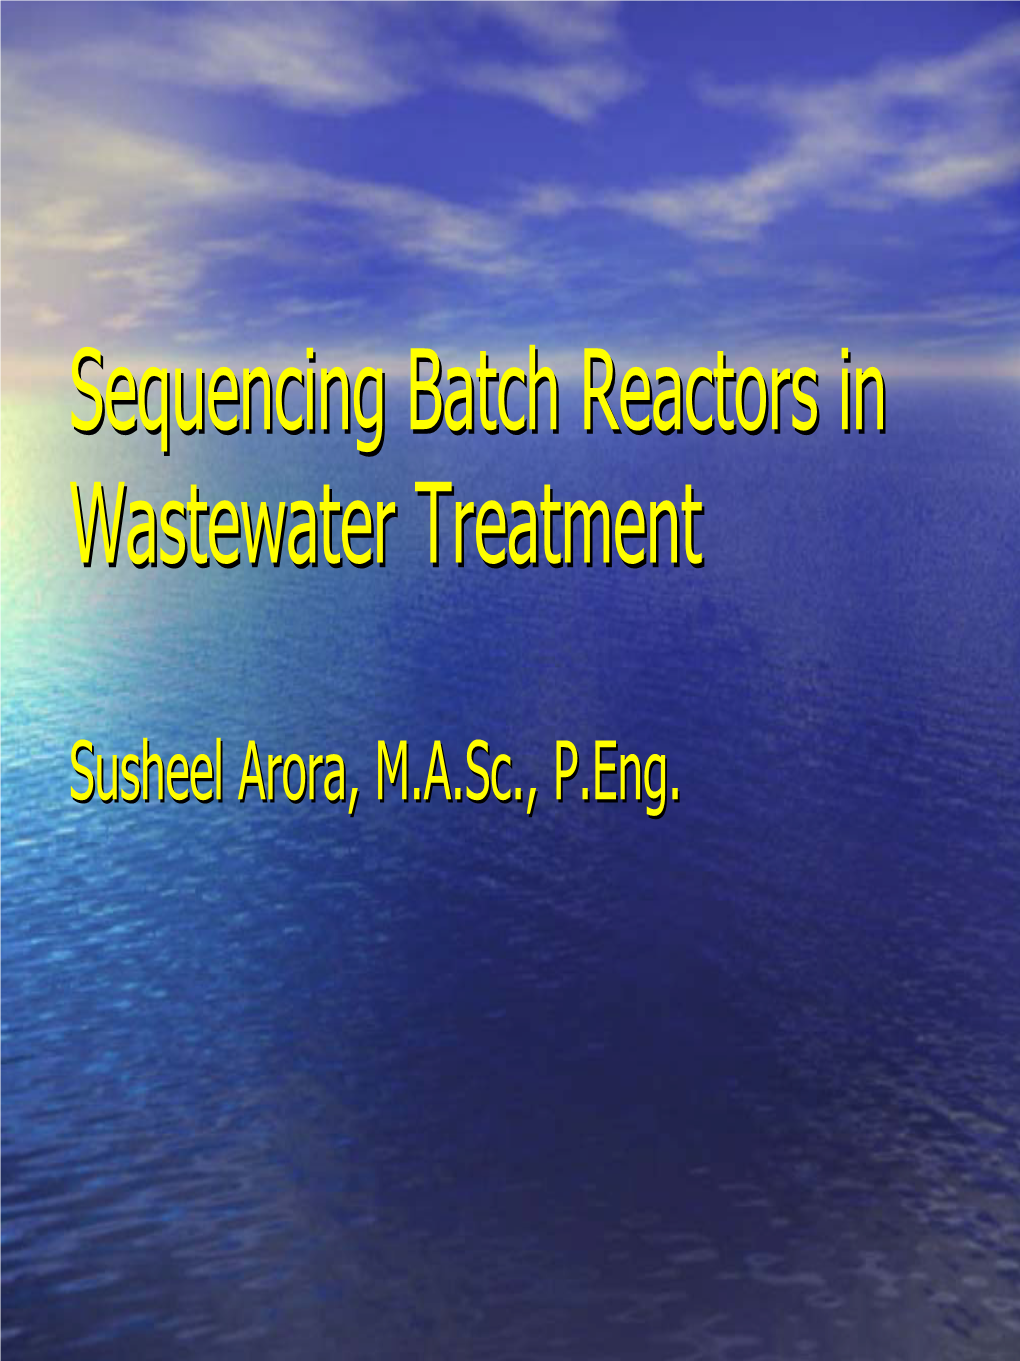 Sequencing Batch Reactors in Wastewater Treatment